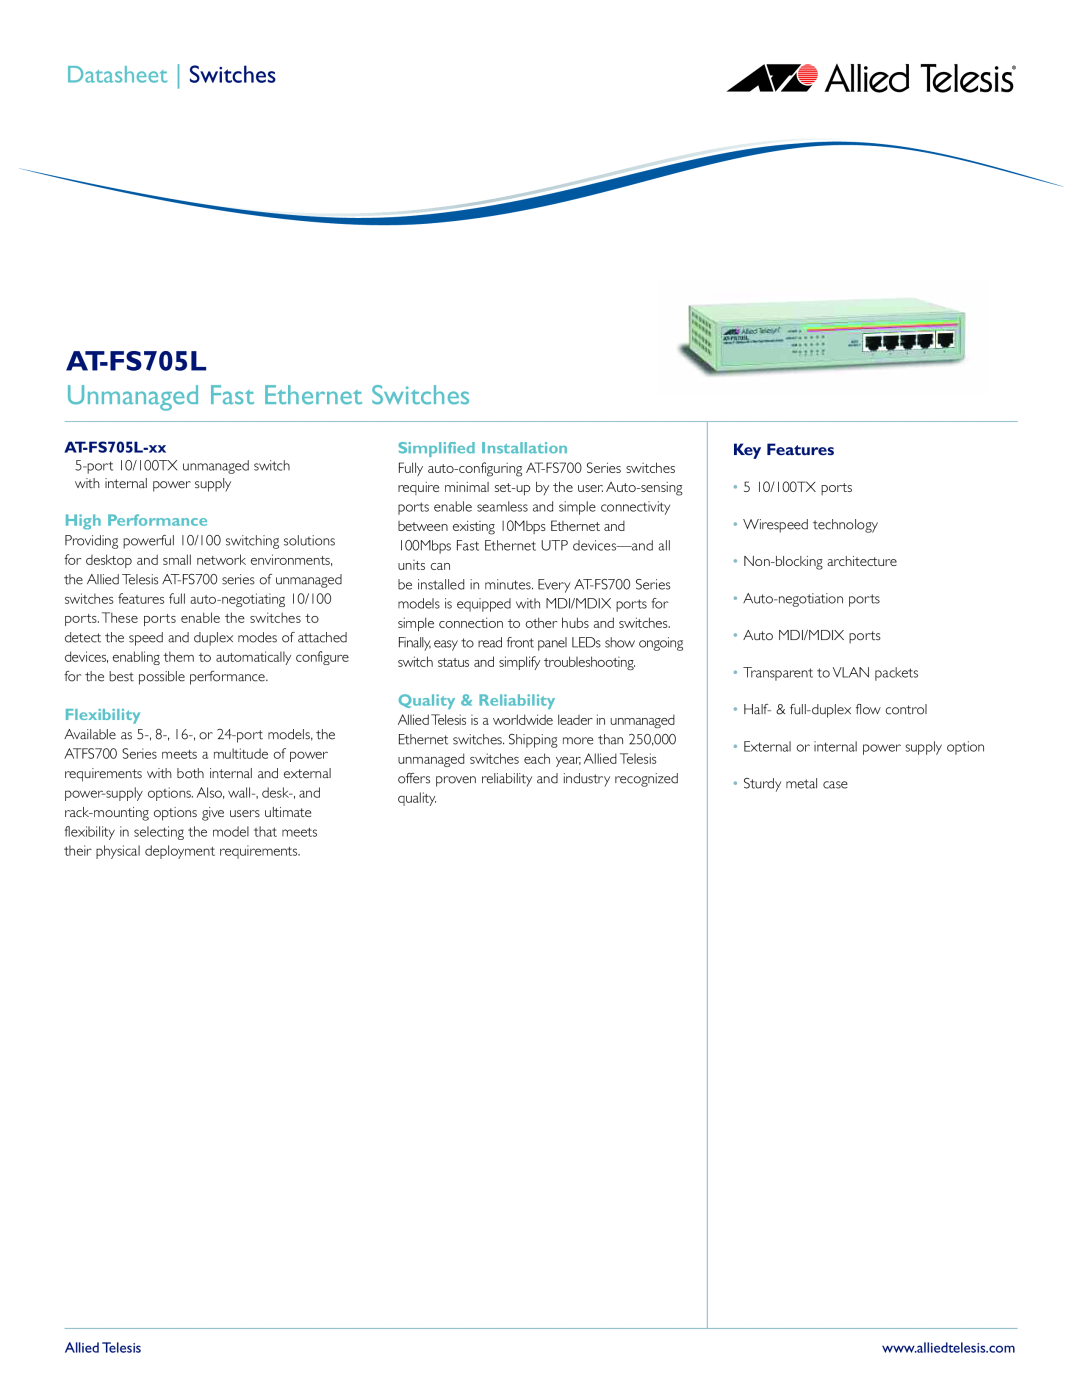 Allied Telesis AT-FS705L manual Unmanaged Fast Ethernet Switches, High Performance, Flexibility, Simplified Installation 